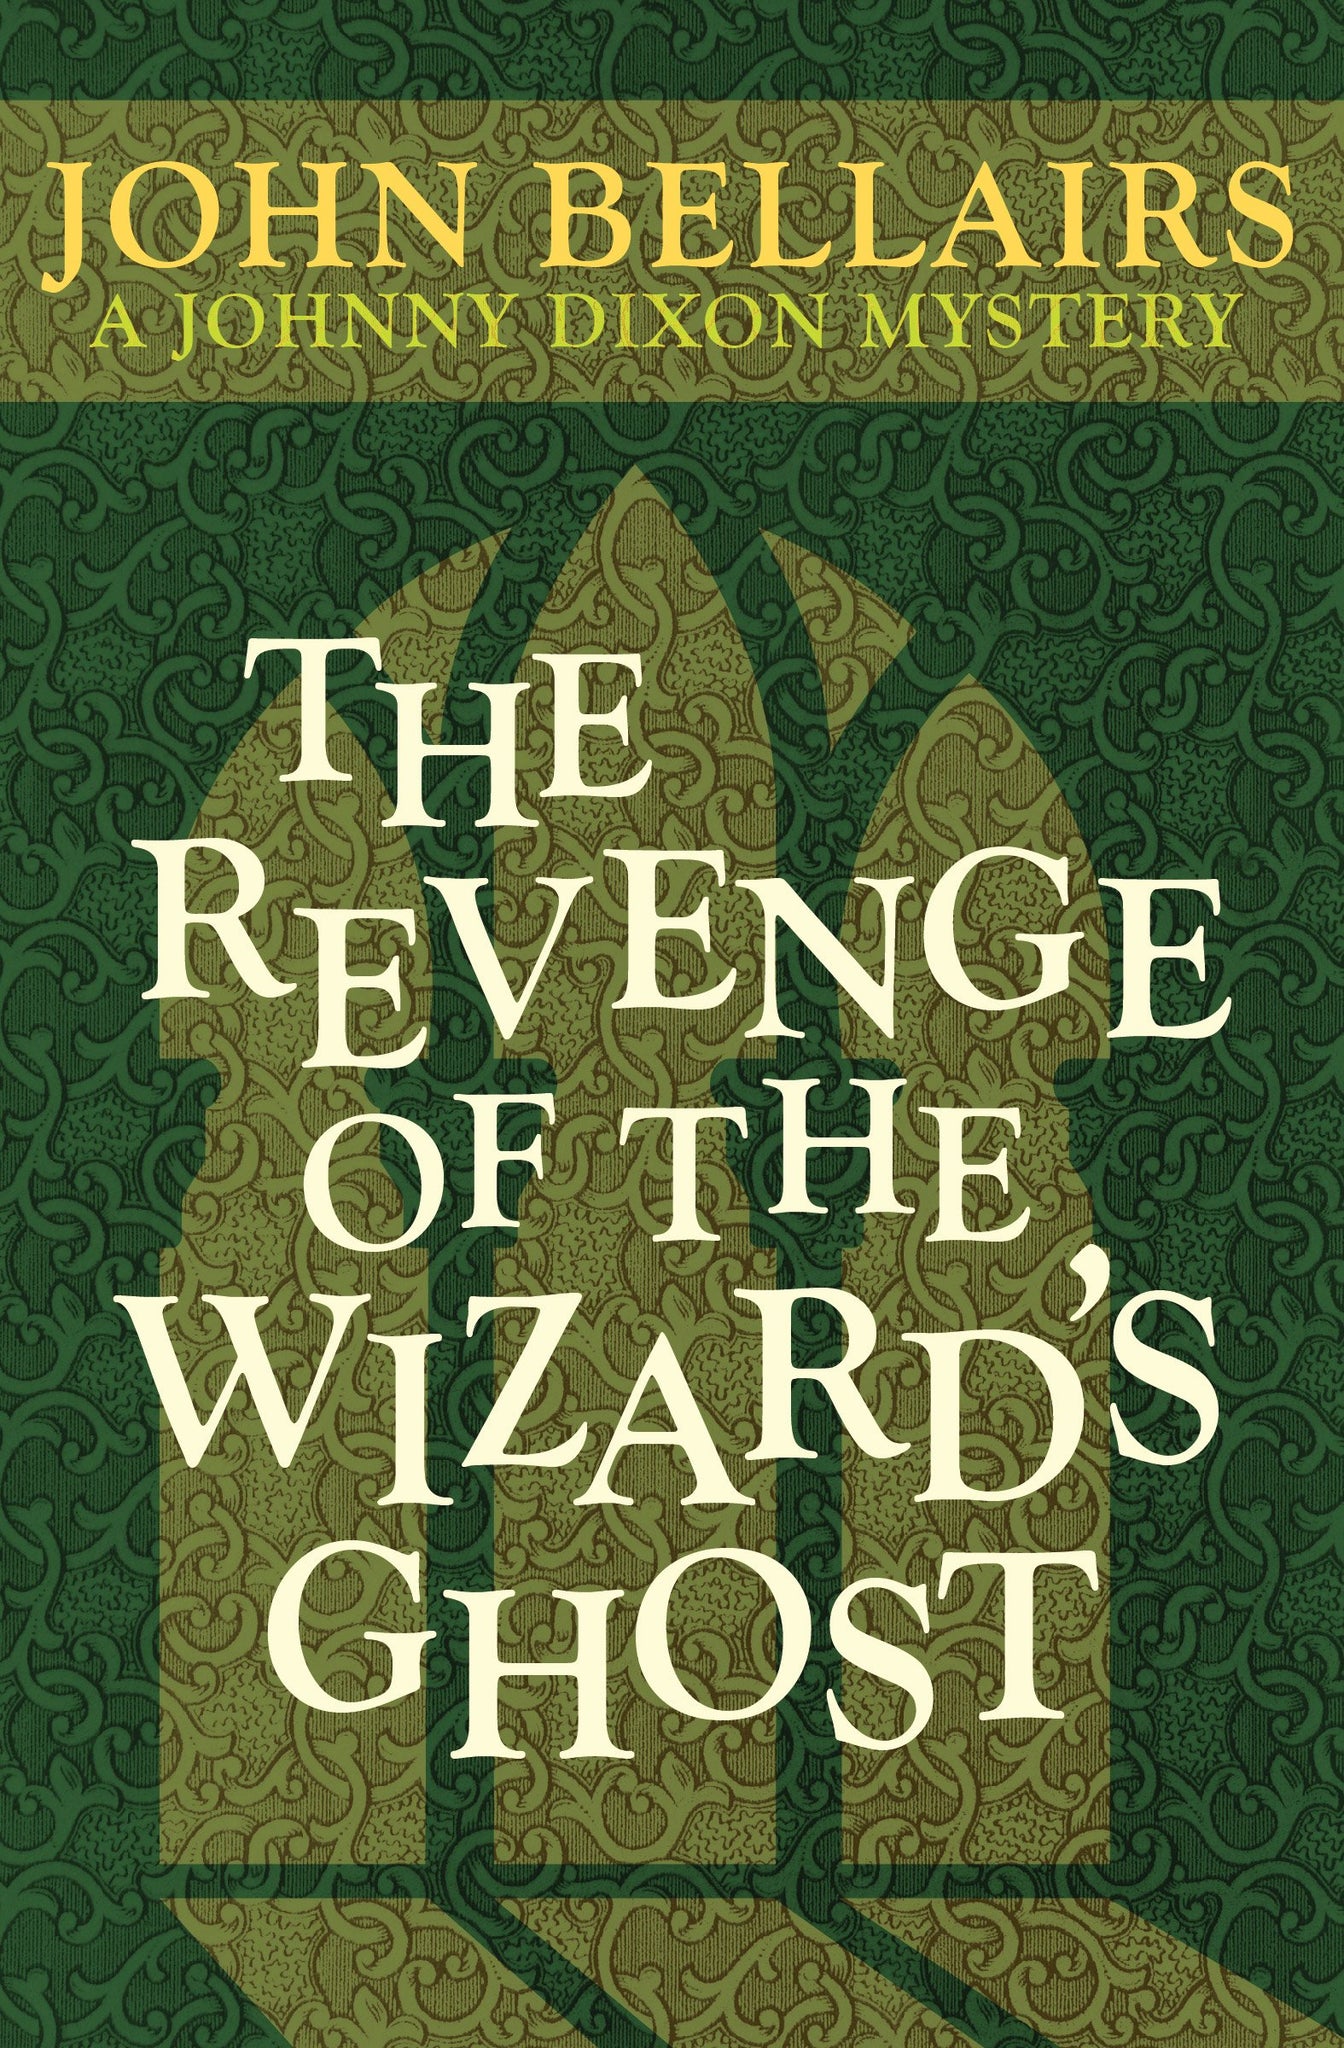 Johnny Dixon #4 : The Revenge of the Wizard's Ghost by John Bellairs